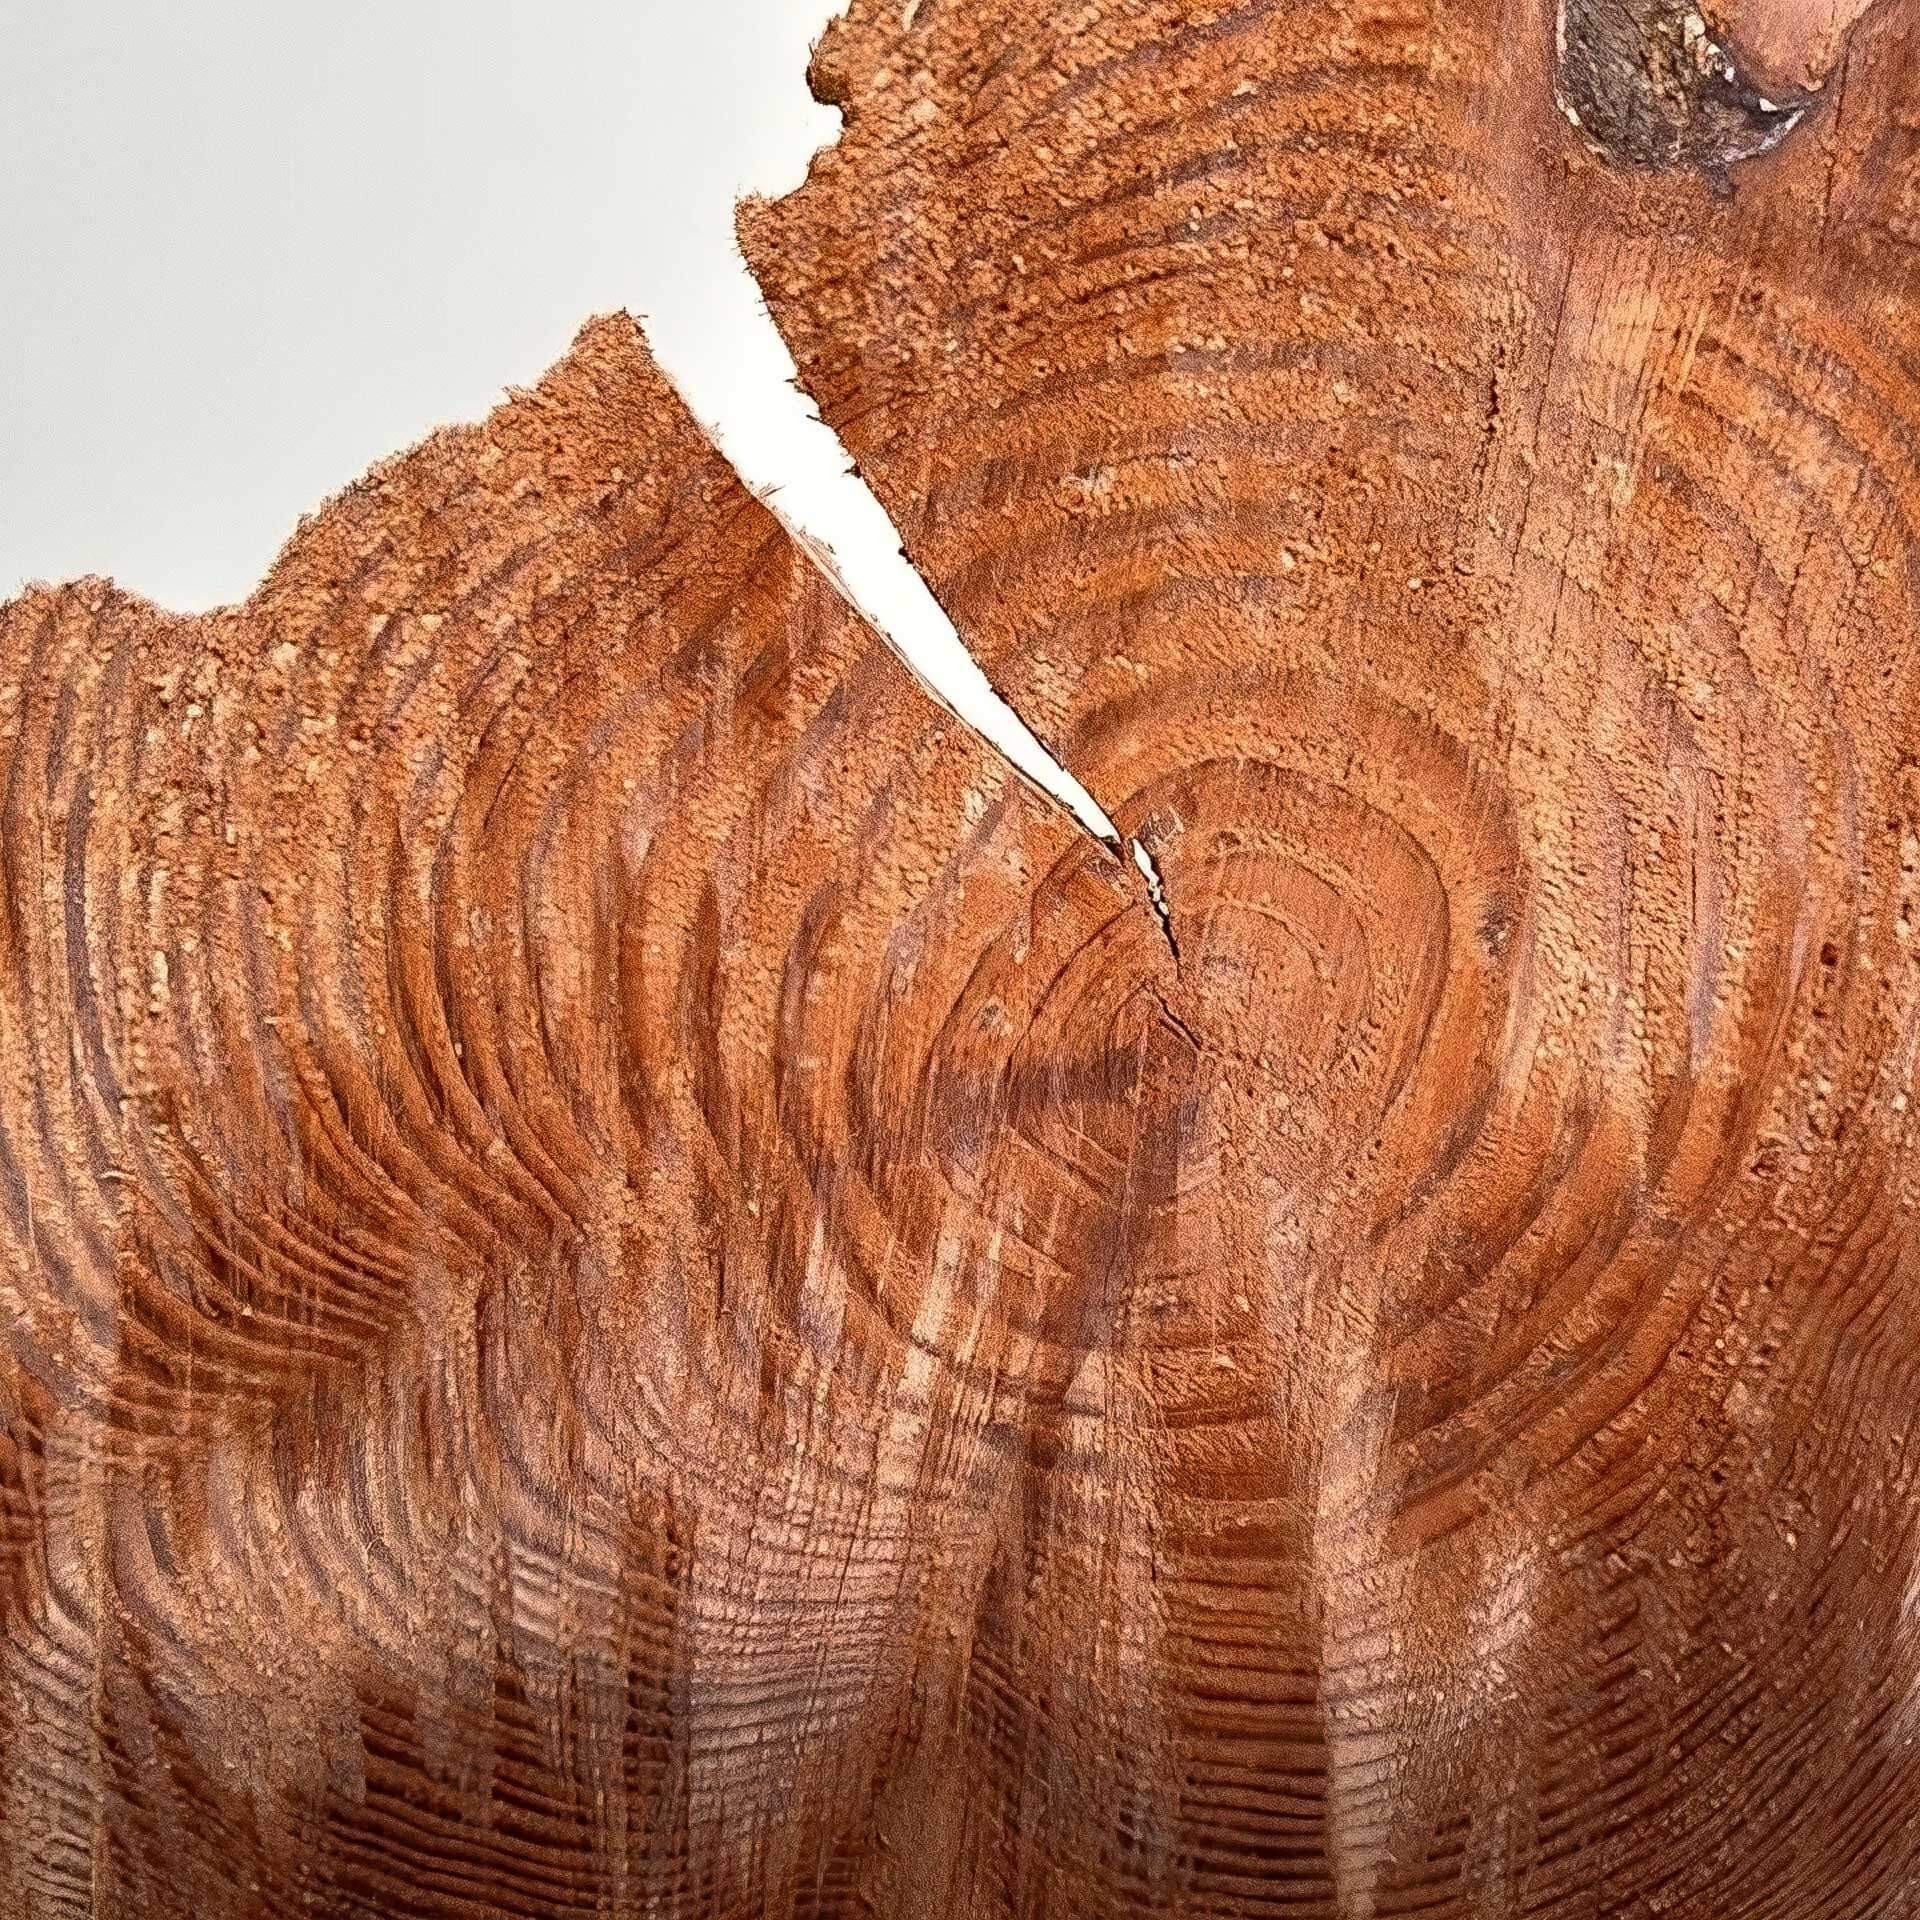 Close up of inside a tree focusing on the details of the rings.